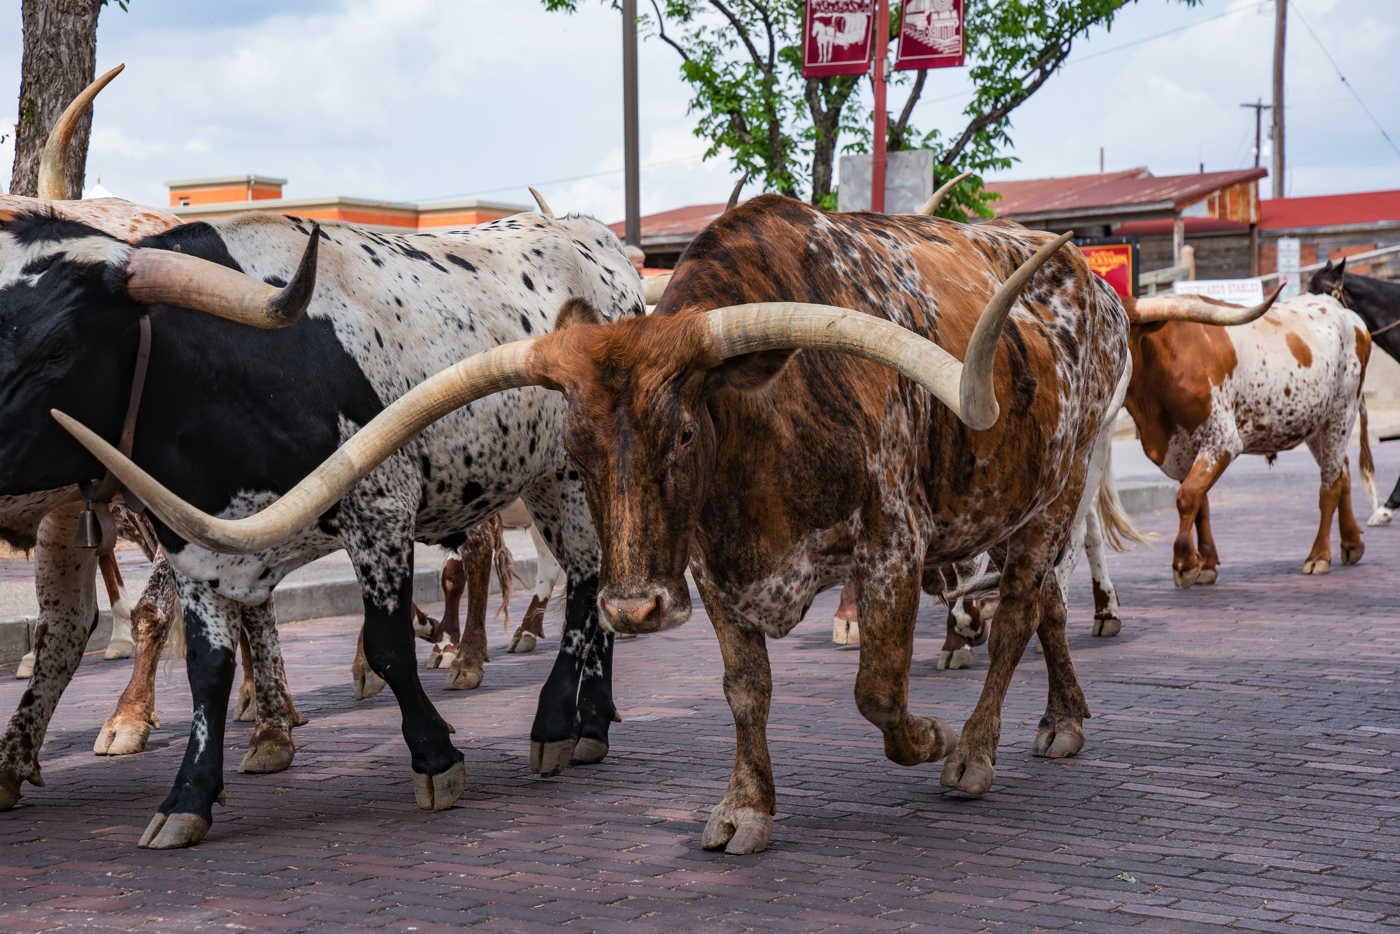 25+ Outstanding Things To Do In Fort Worth, Texas